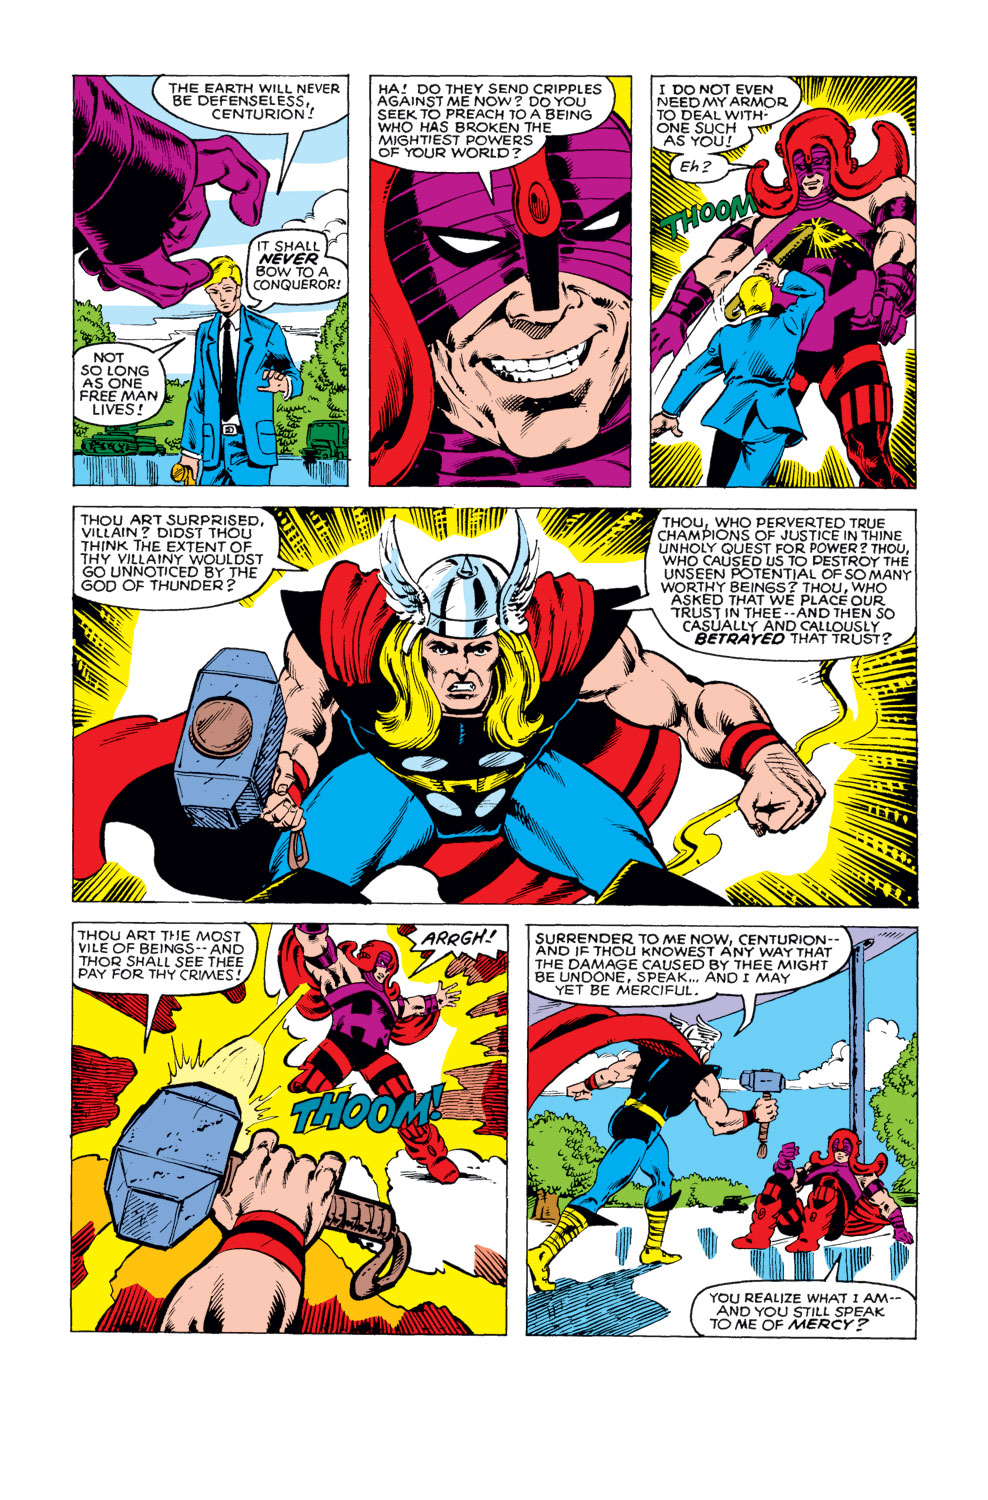 What If? (1977) issue 29 - The Avengers defeated everybody - Page 17